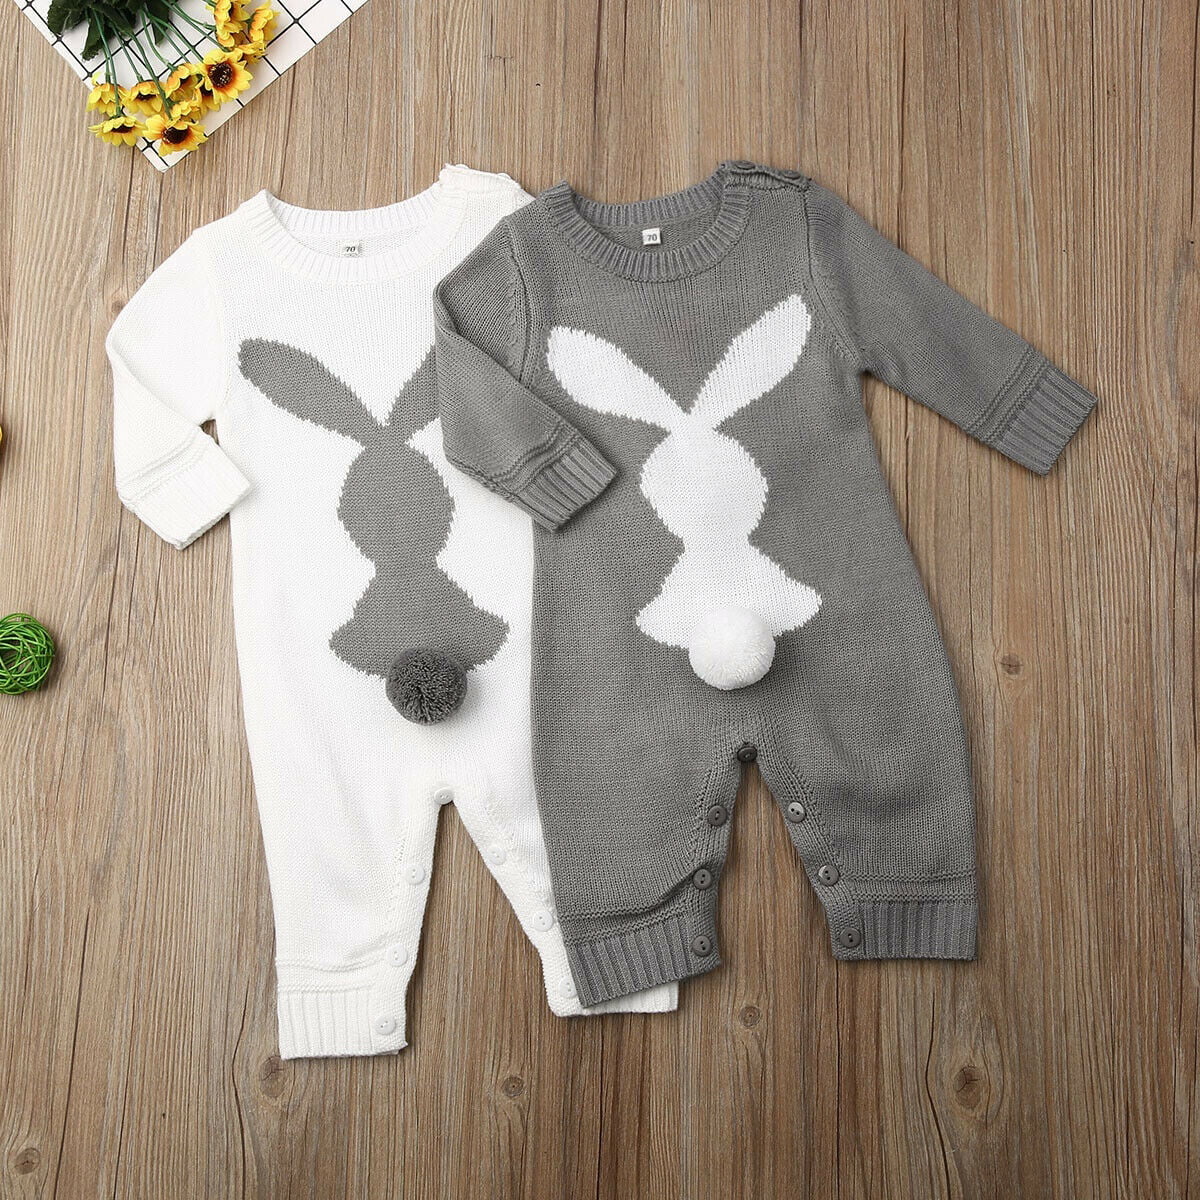 5 month baby winter clothes